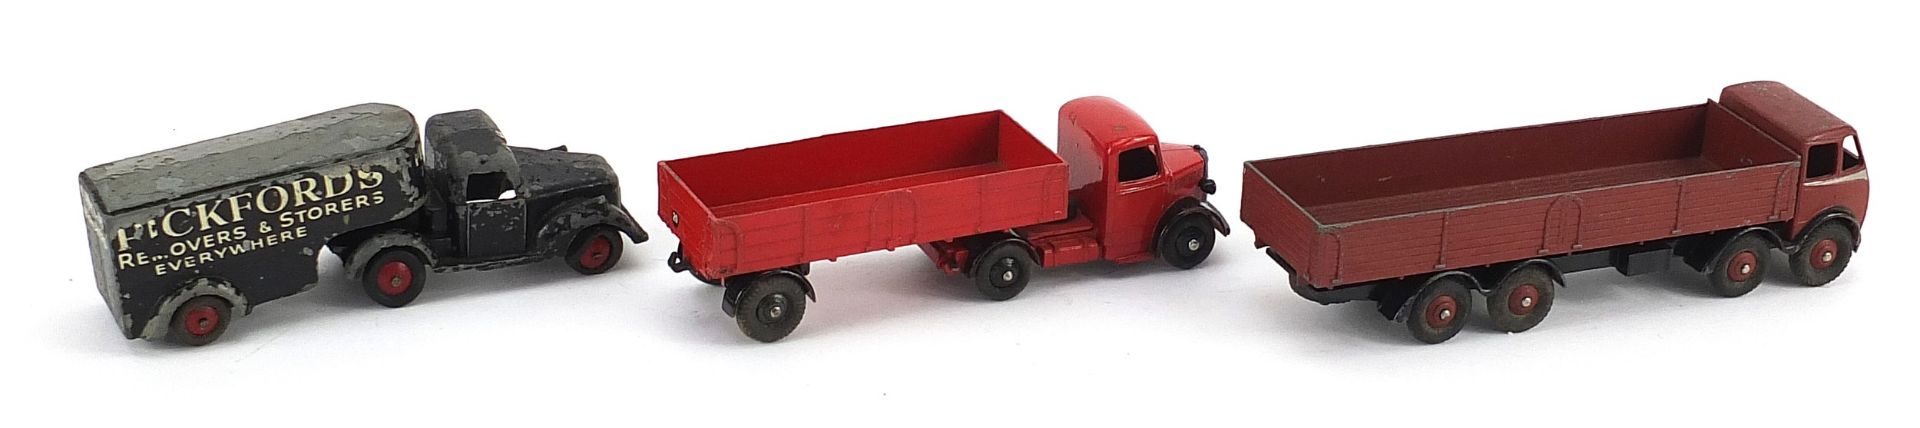 Two vintage Dinky diecast lorries and a Timpo Toys Pickfords Removal lorry - Image 3 of 5